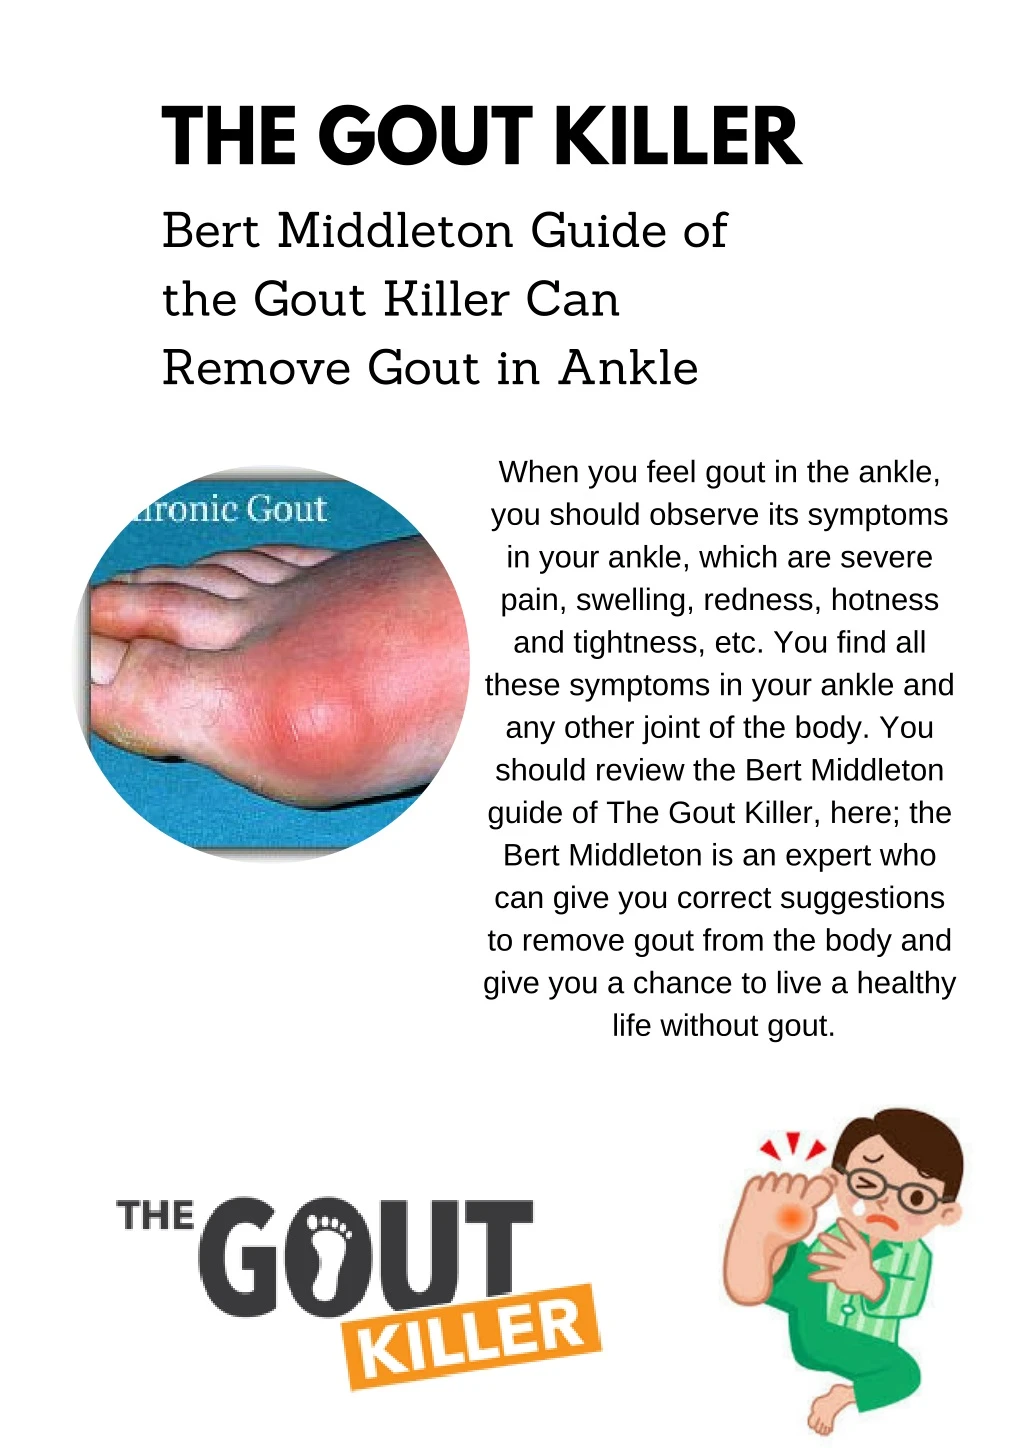 the gout killer bert middleton guide of the gout